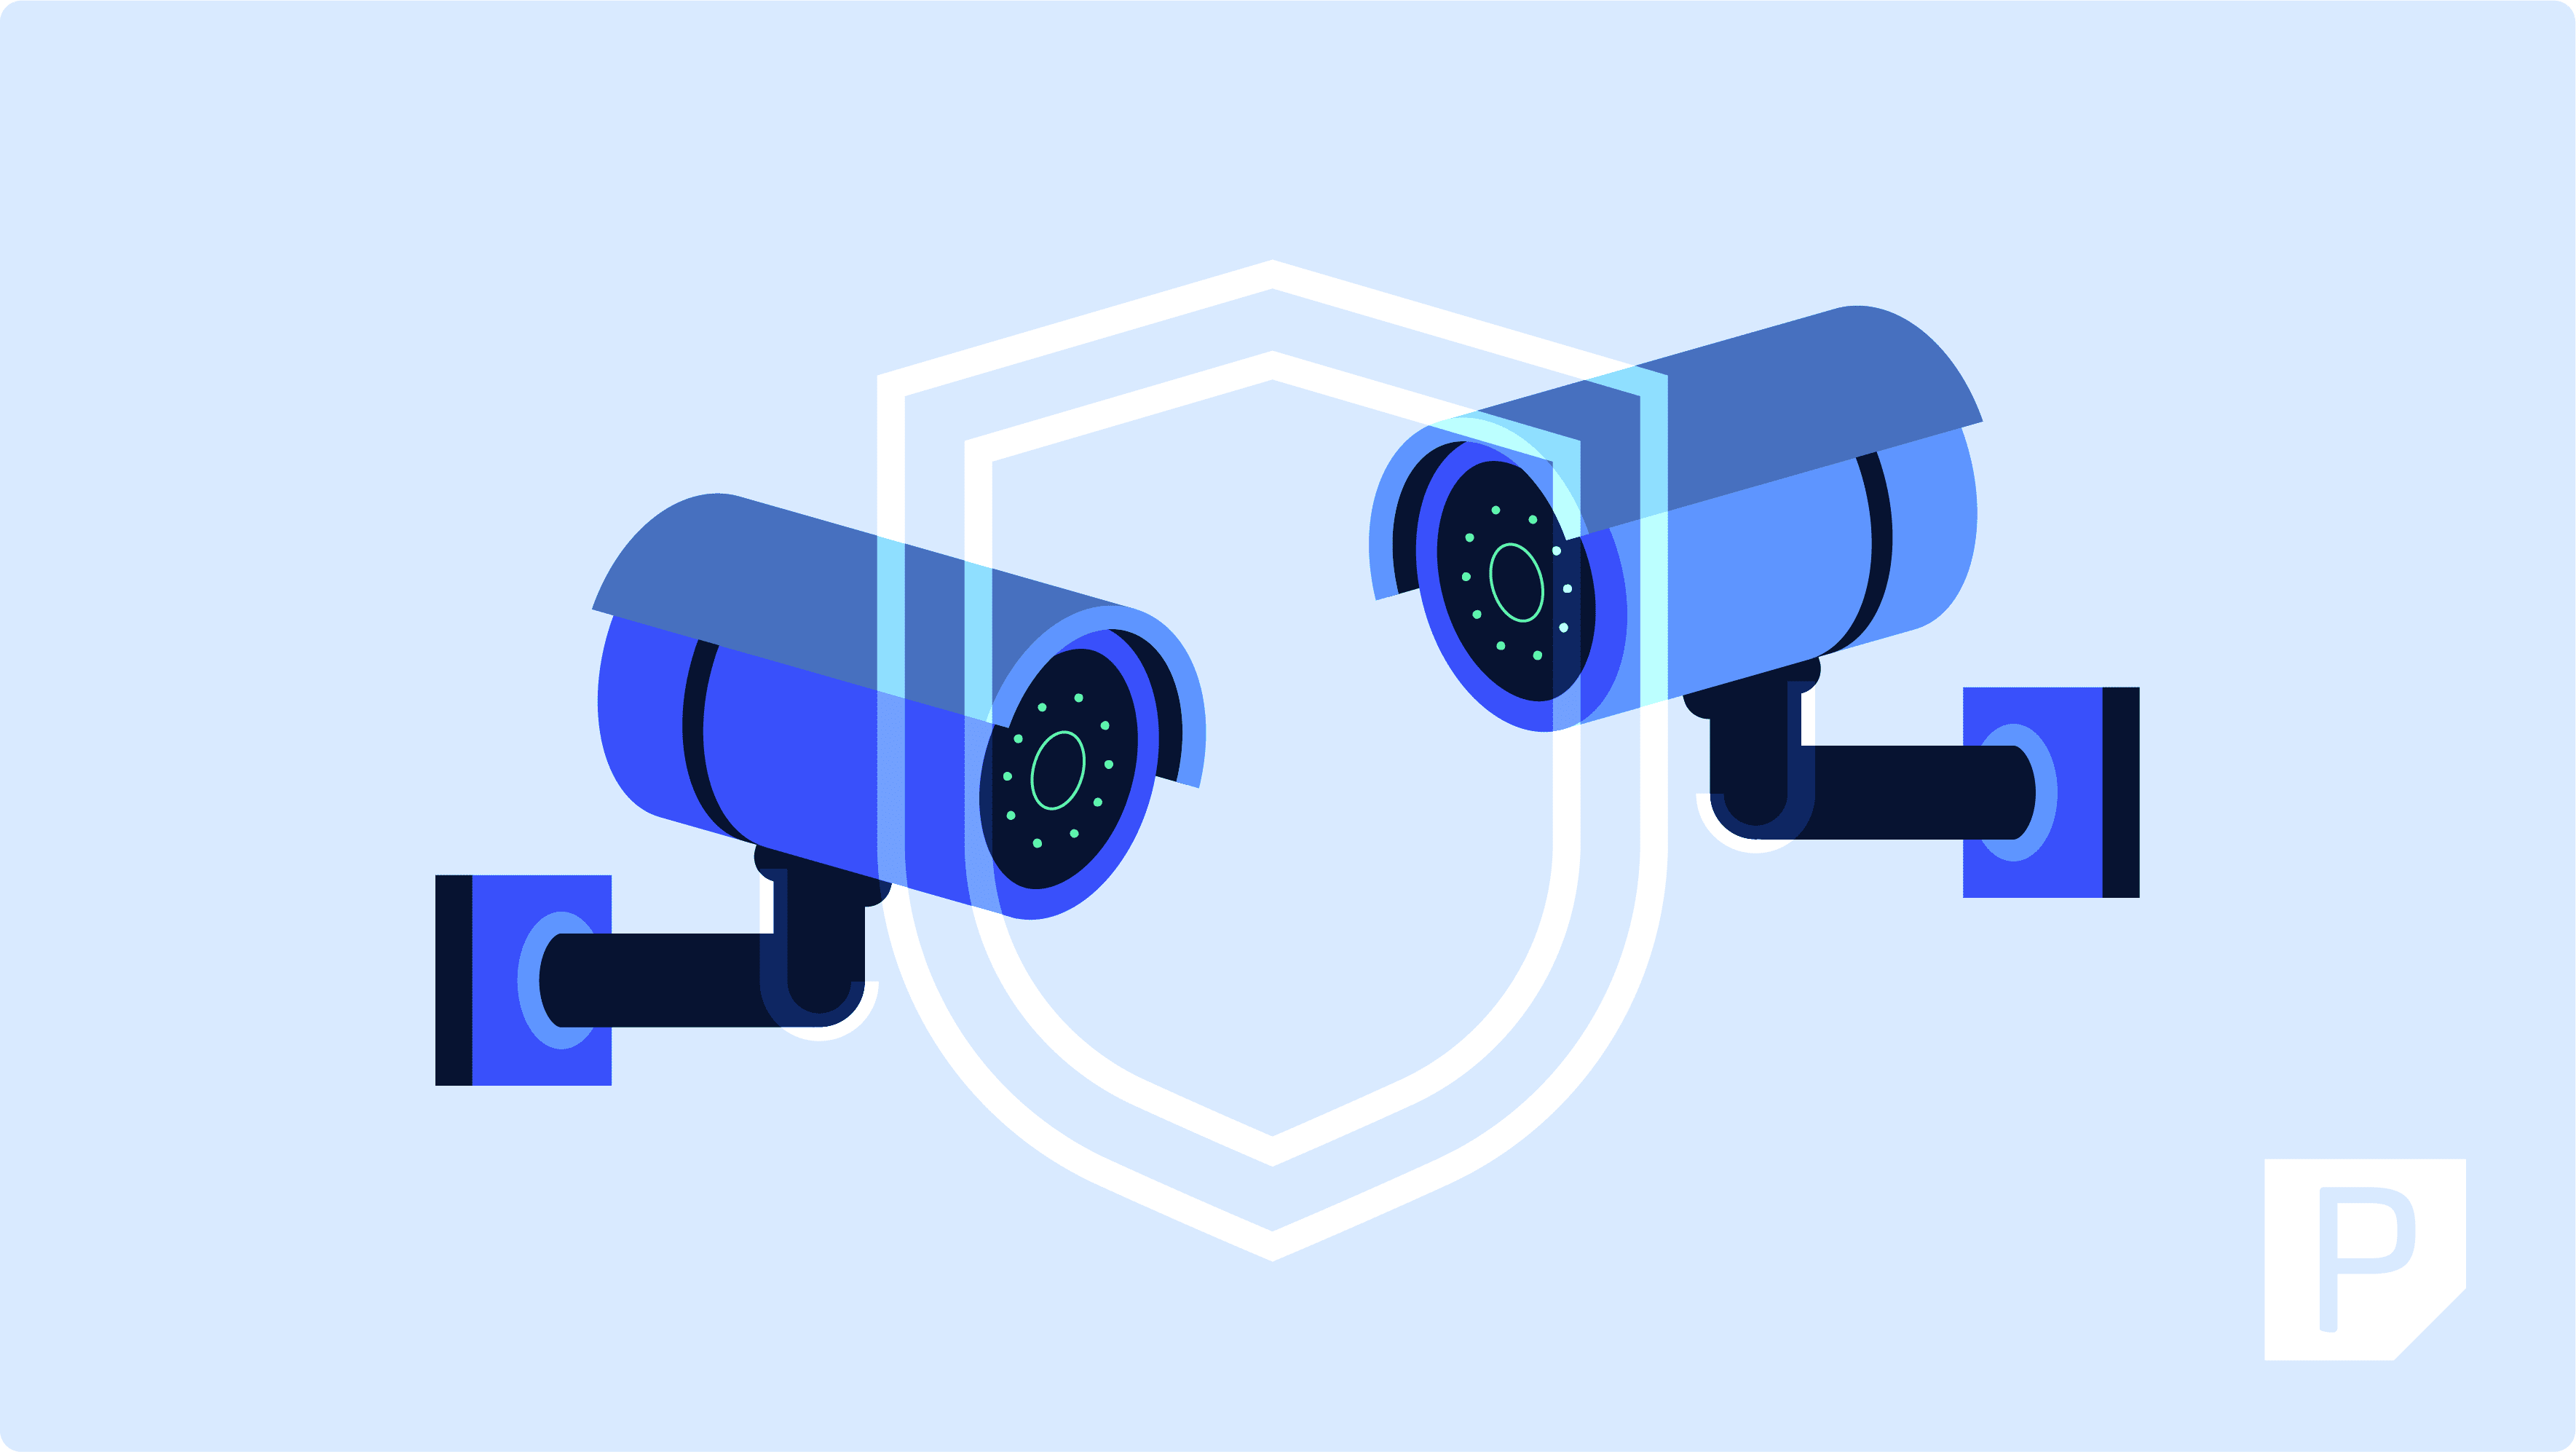 Graphic showing two cameras pointed toward one another with the outline of a shield in the center. Pressable's logo is in the bottom right corner.